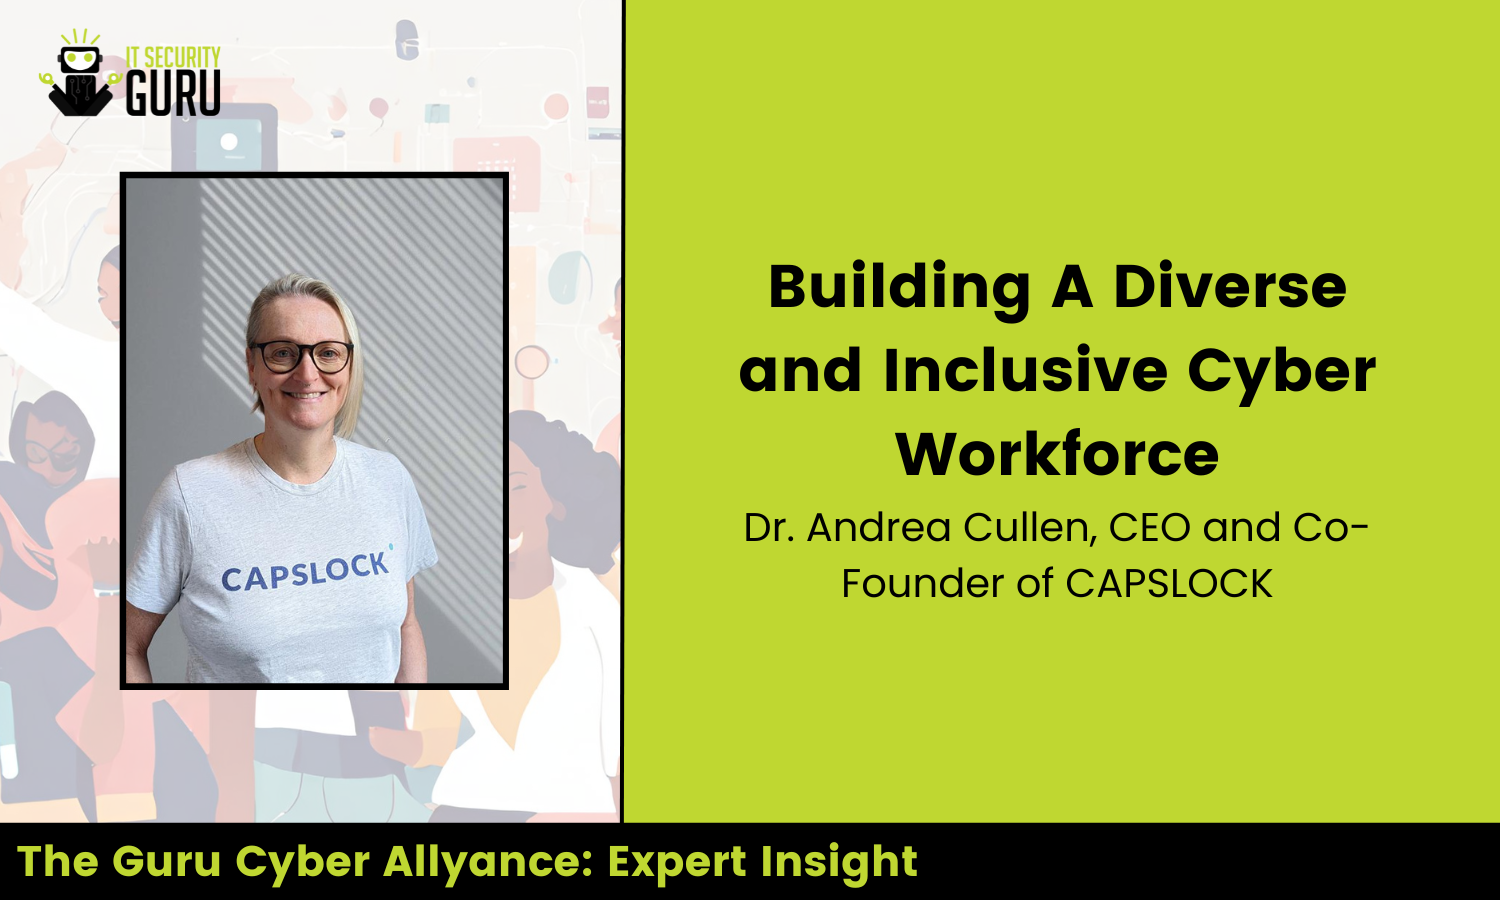 Building a diverse and inclusive cyber workforce